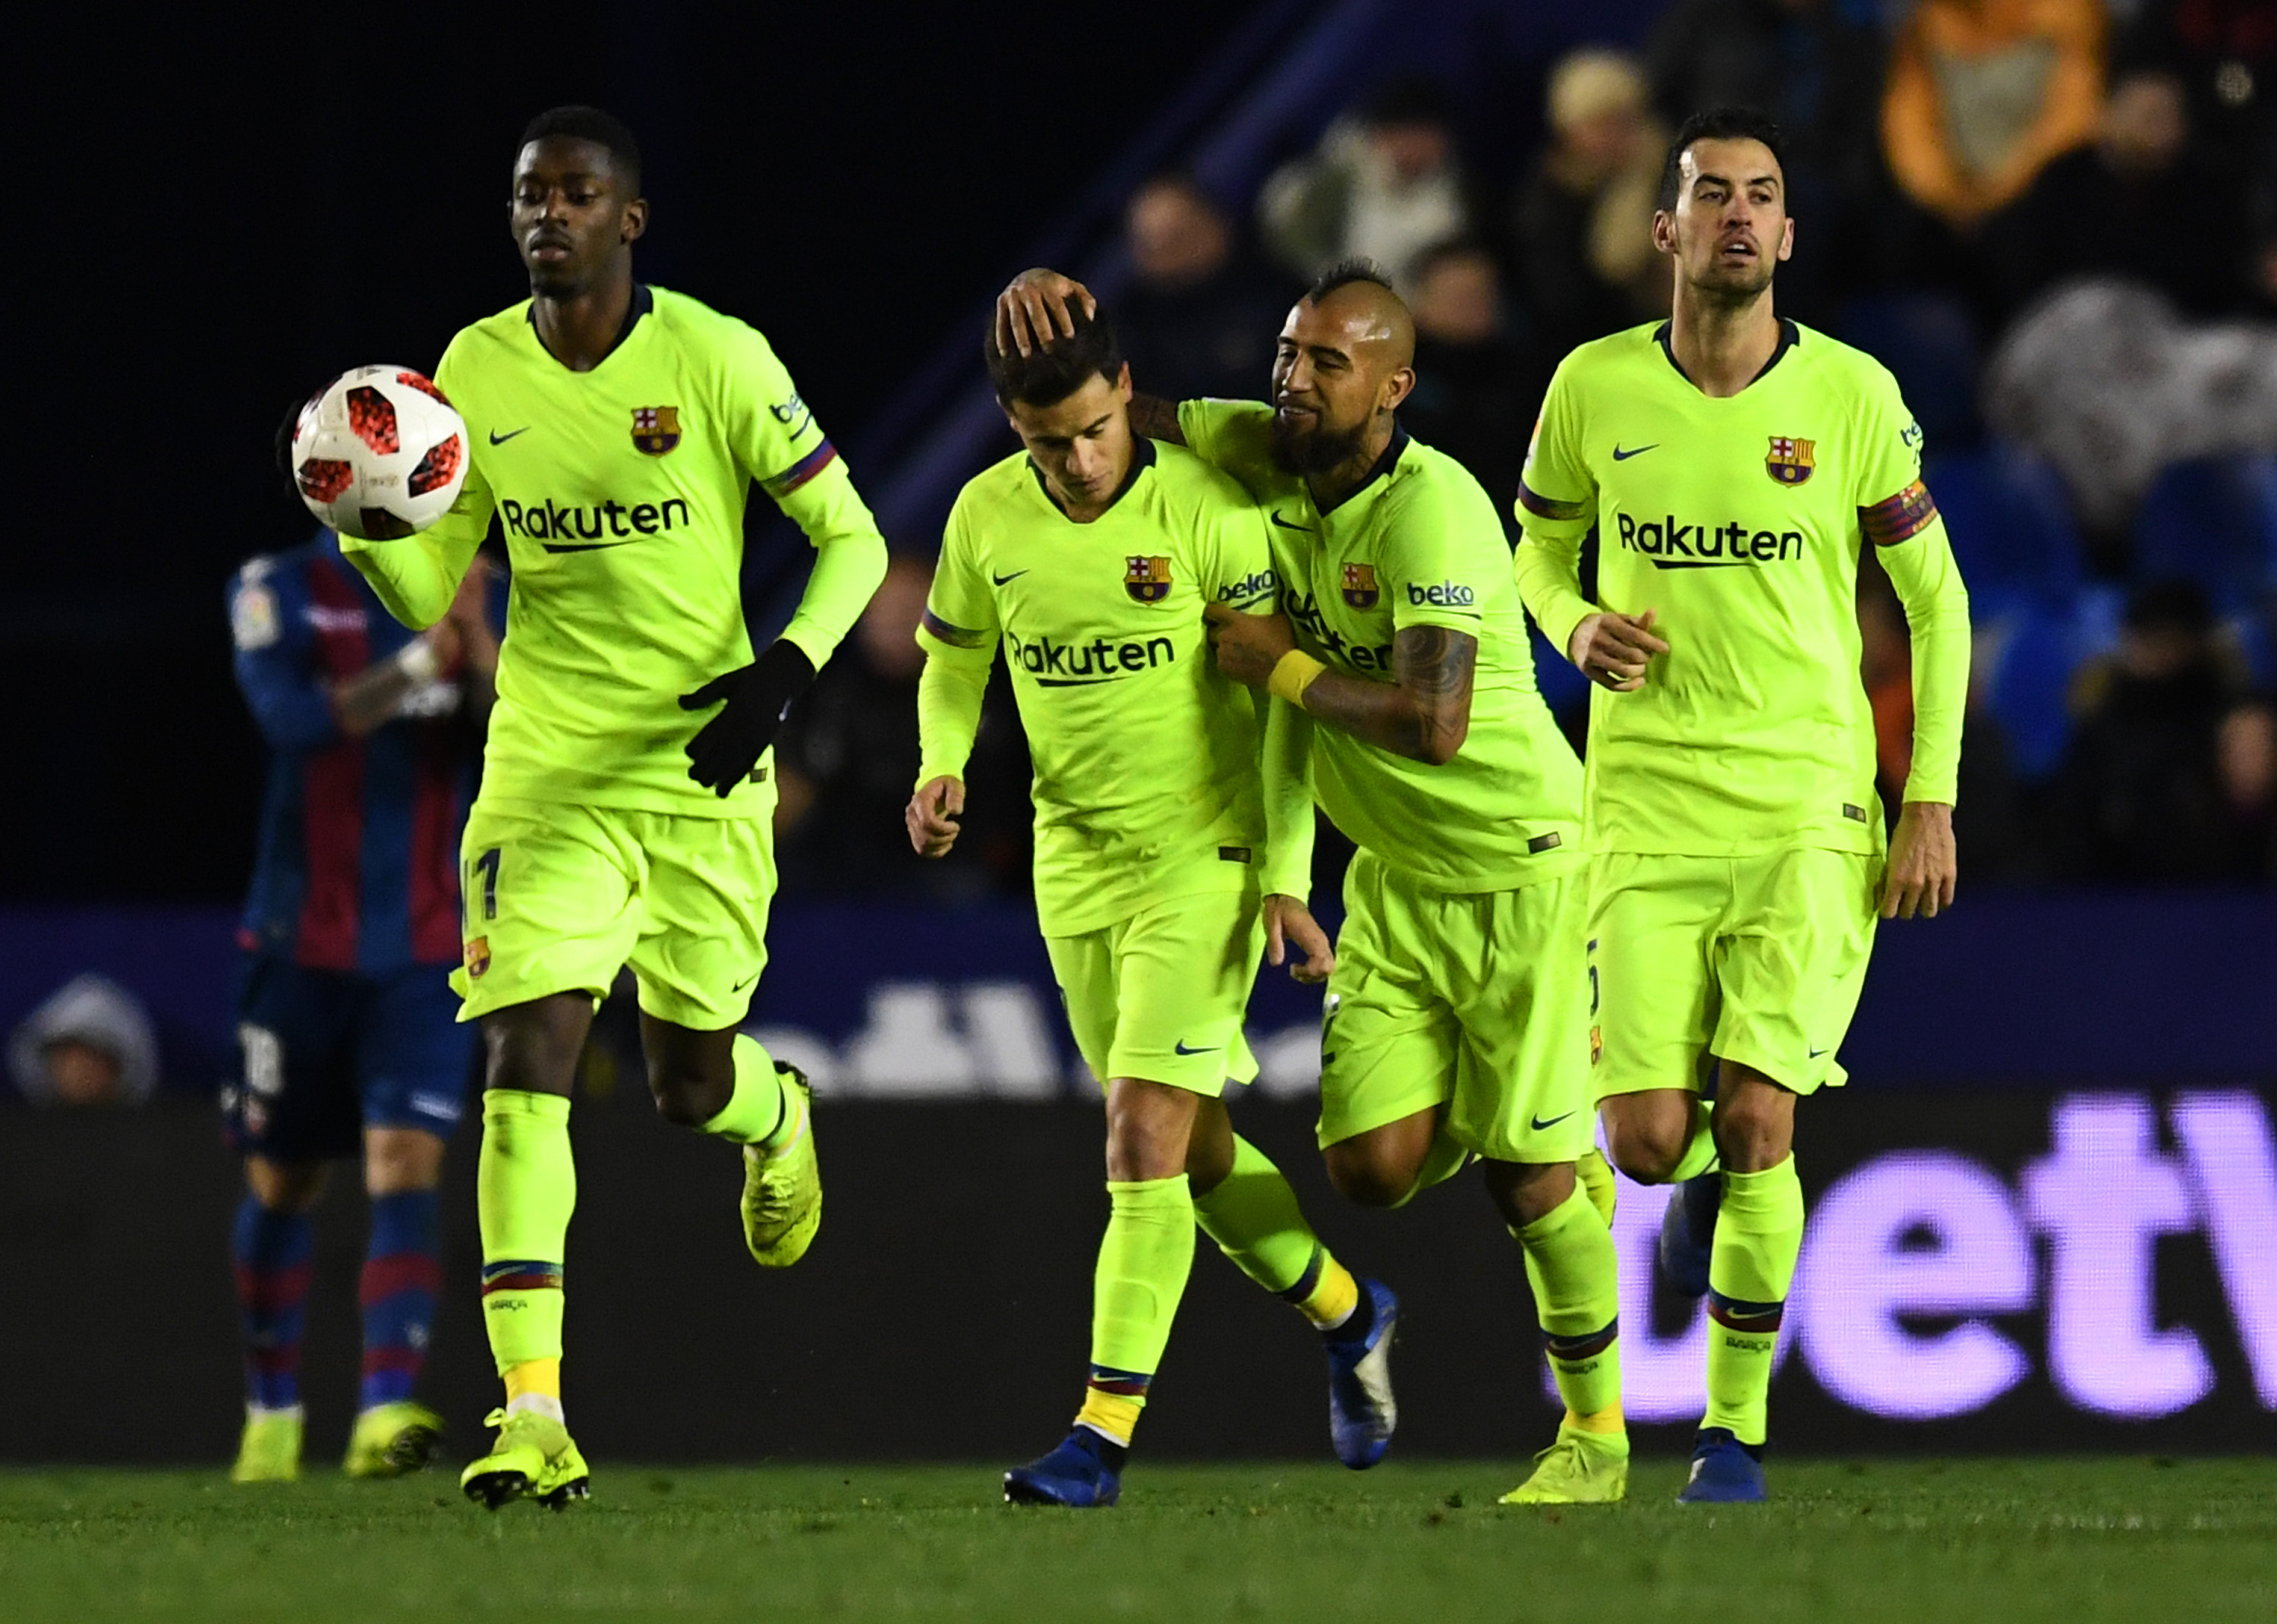 VALENCIA, SPAIN - JANUARY 10:  Philippe Coutinho of Barcelona (2L) celebrates after scoring his team's first goal with Ousmane Dembele (L), Arturo Vidal (2R) and Sergio Busquets (R) during the Copa del Rey Round of 16 match between Levante and FC Barcelona at Ciutat de Valencia on January 10, 2019 in Valencia, Spain. (Photo by David Ramos/Getty Images)